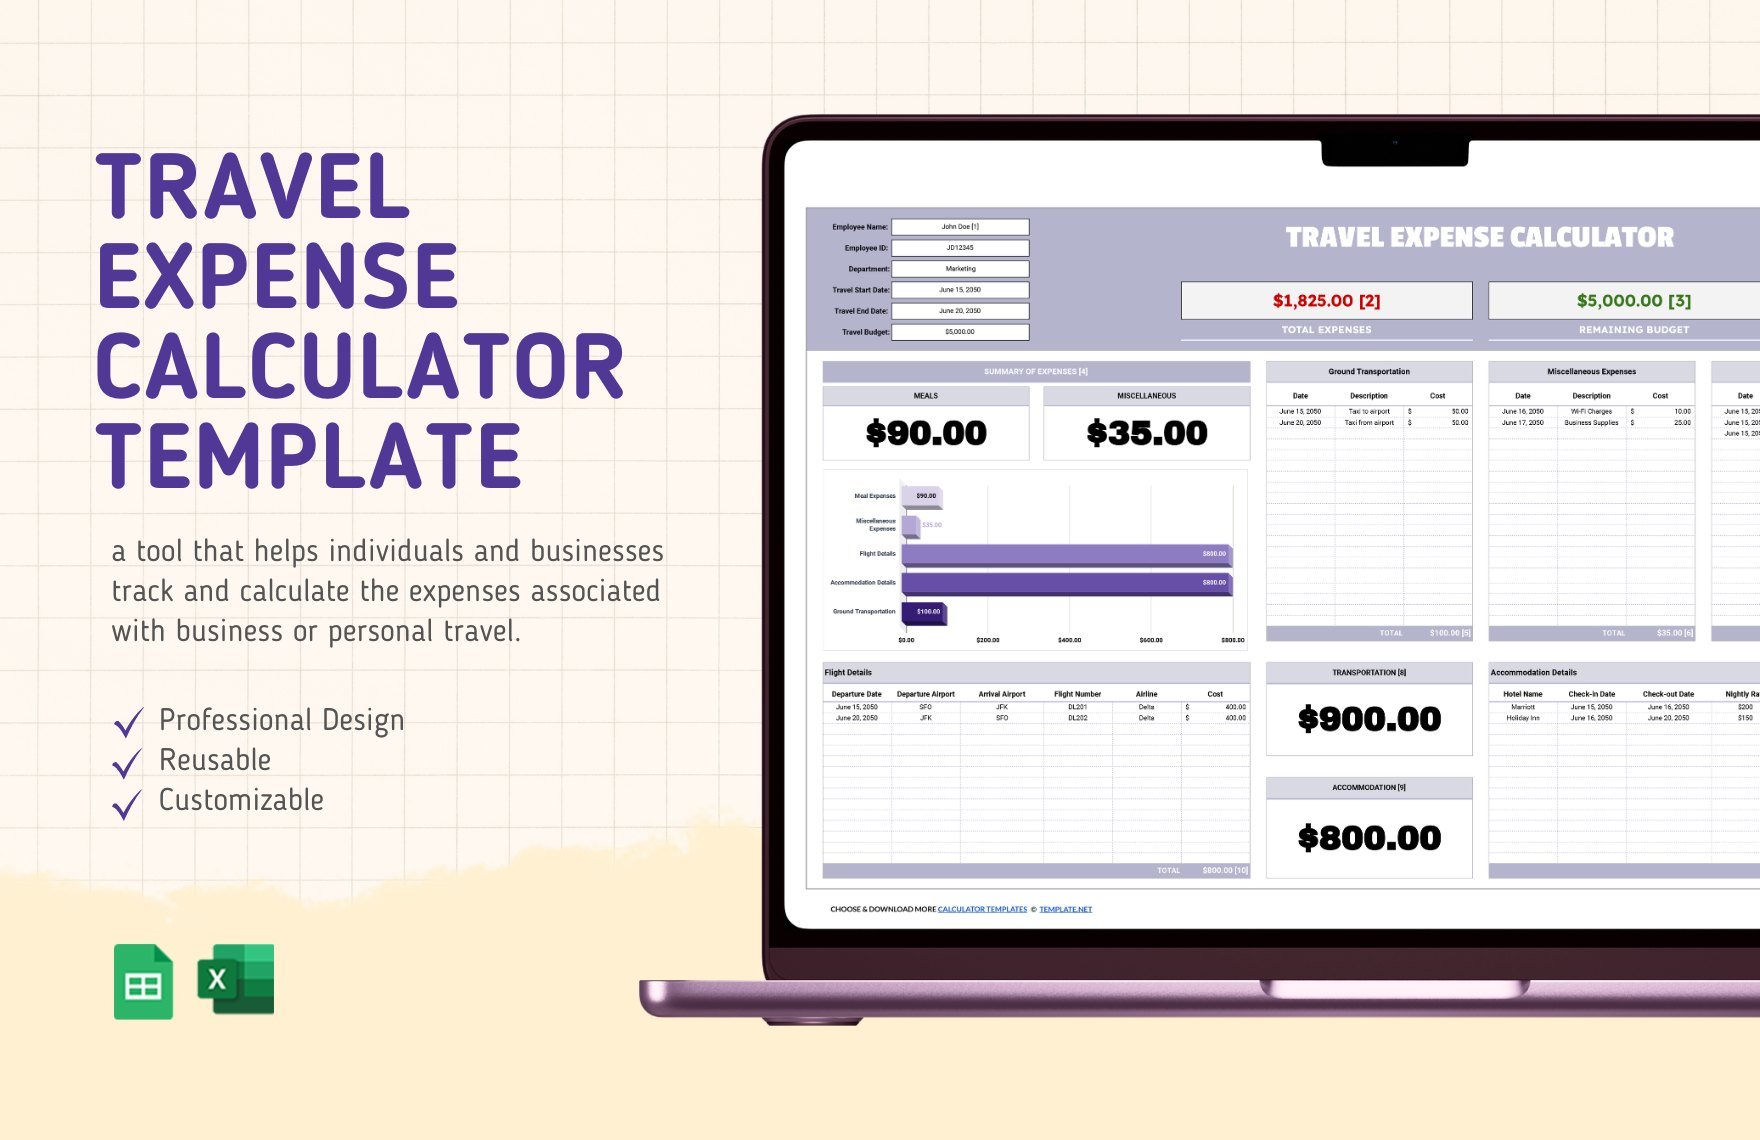 Free Travel Expense Calculator Template in Excel, Google Sheets